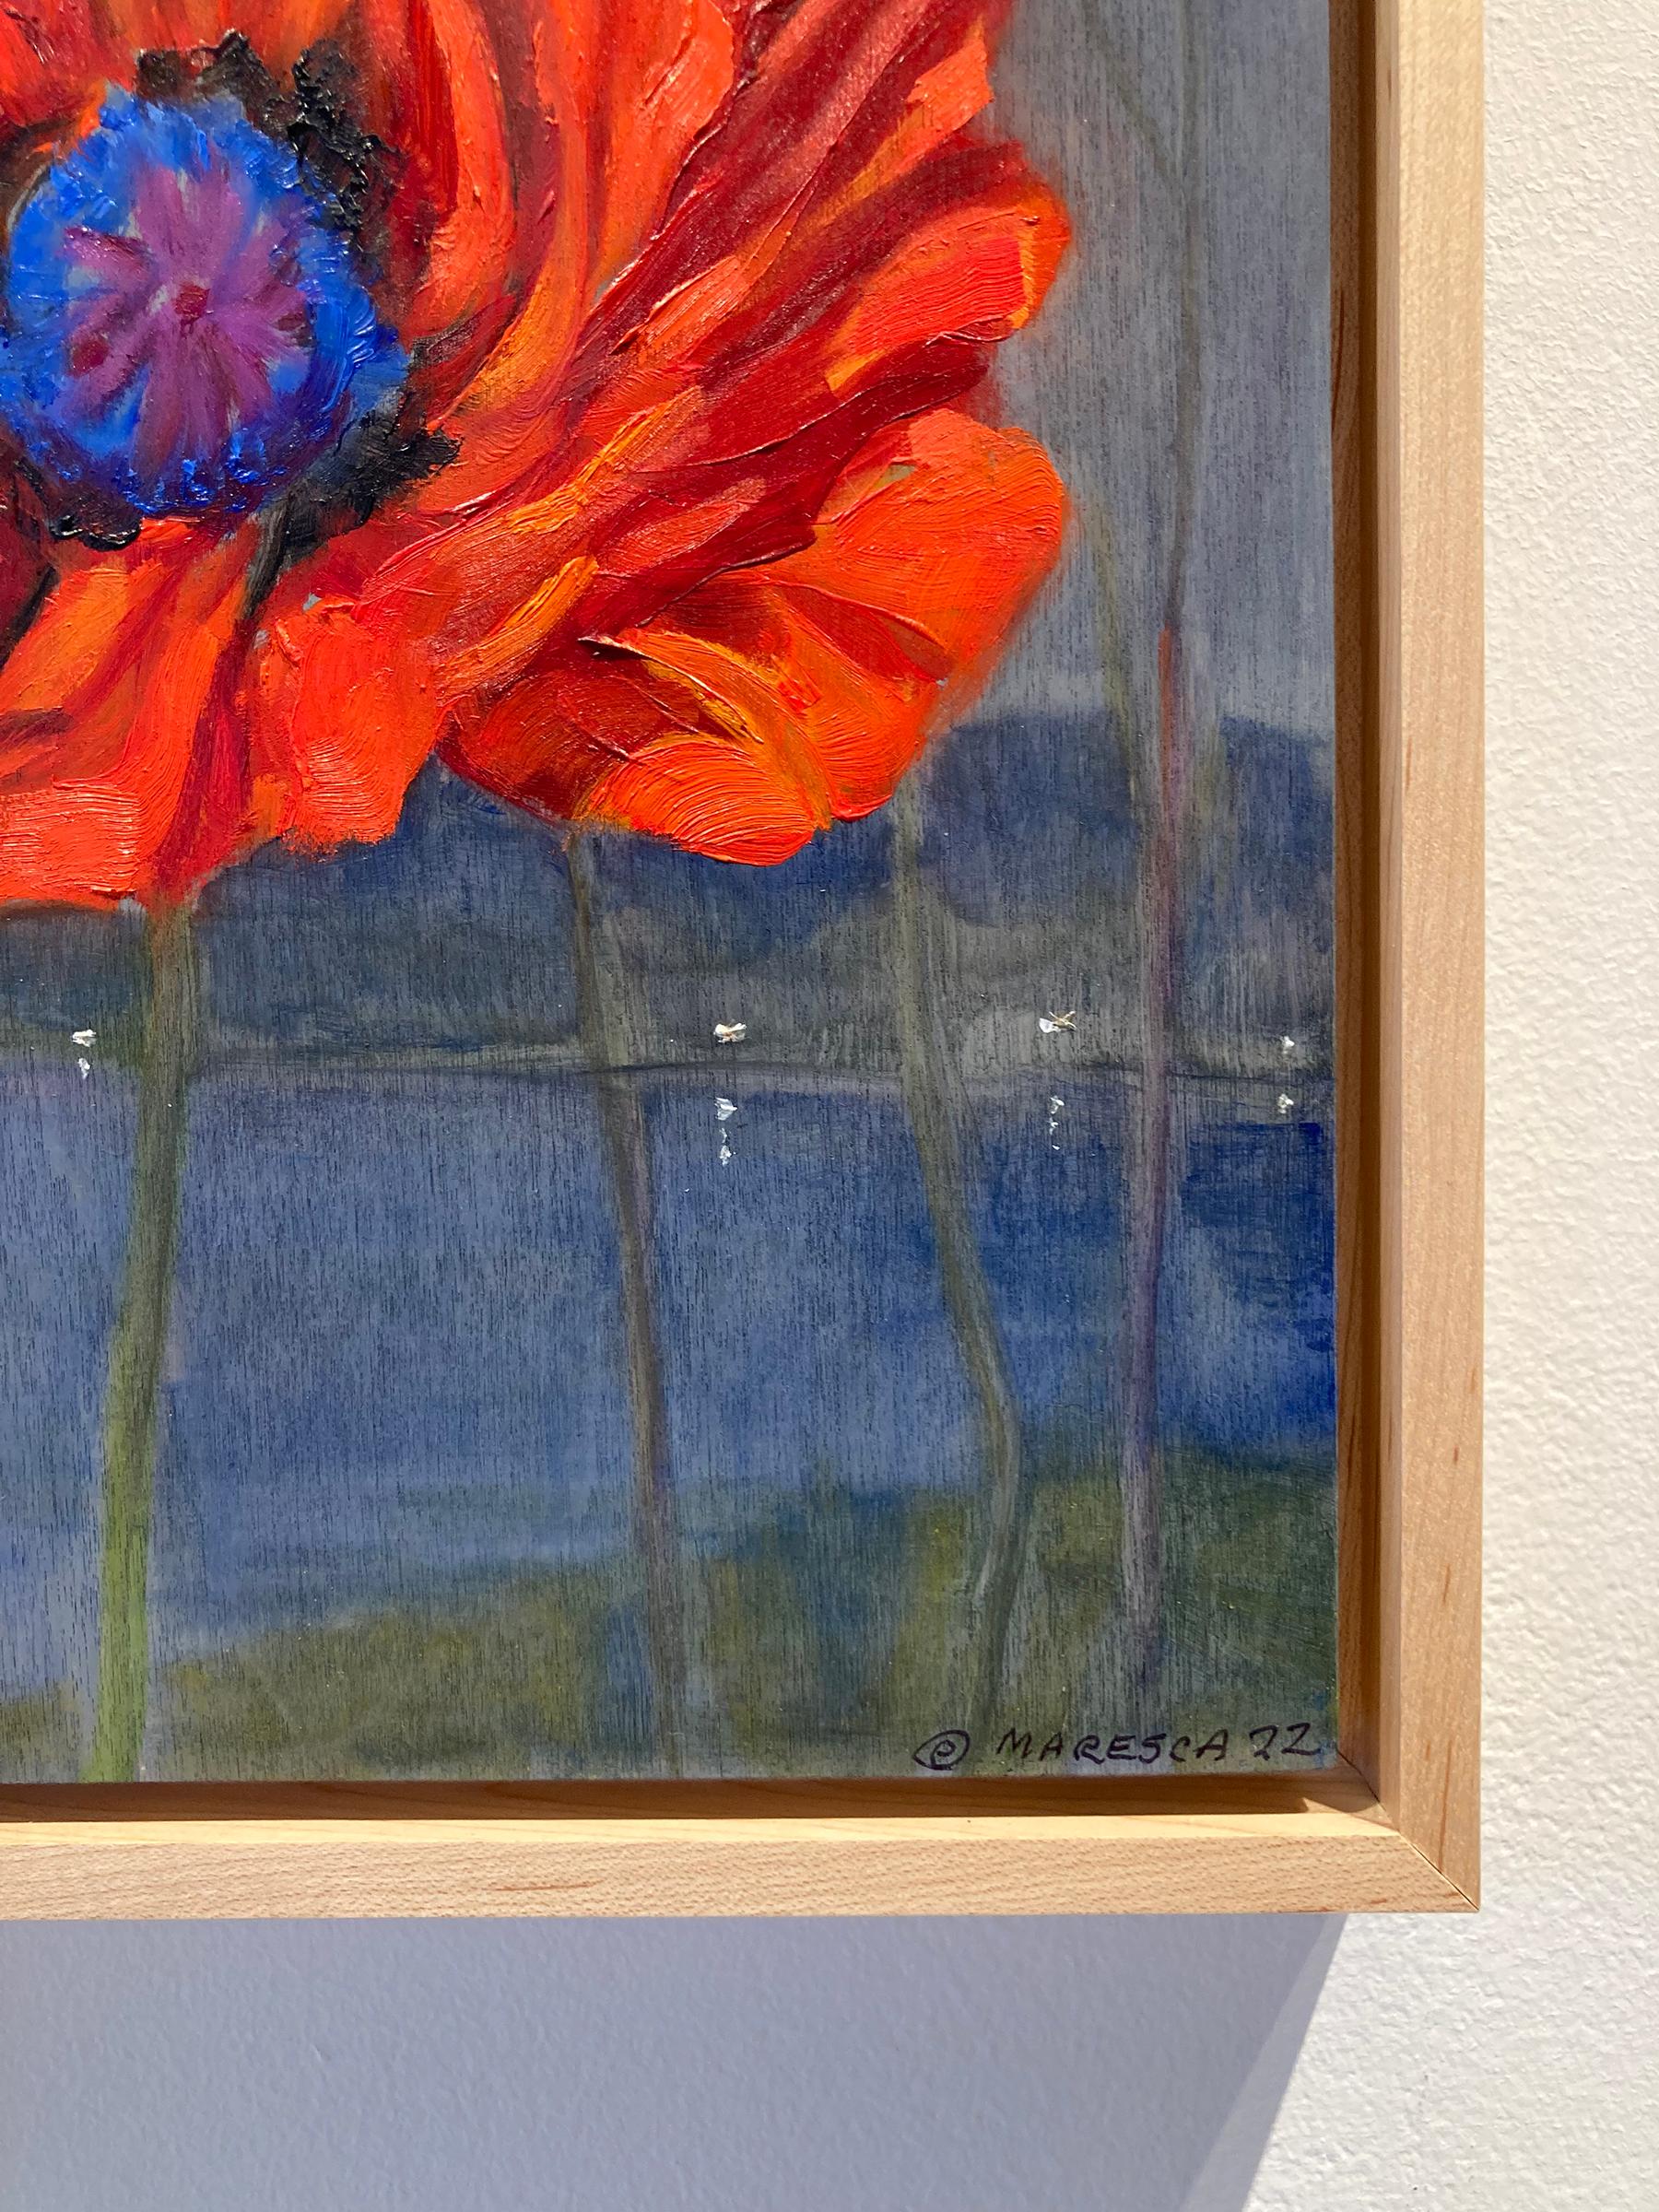 Modern still life painting of a red poppy against a navy blue river landscape 
